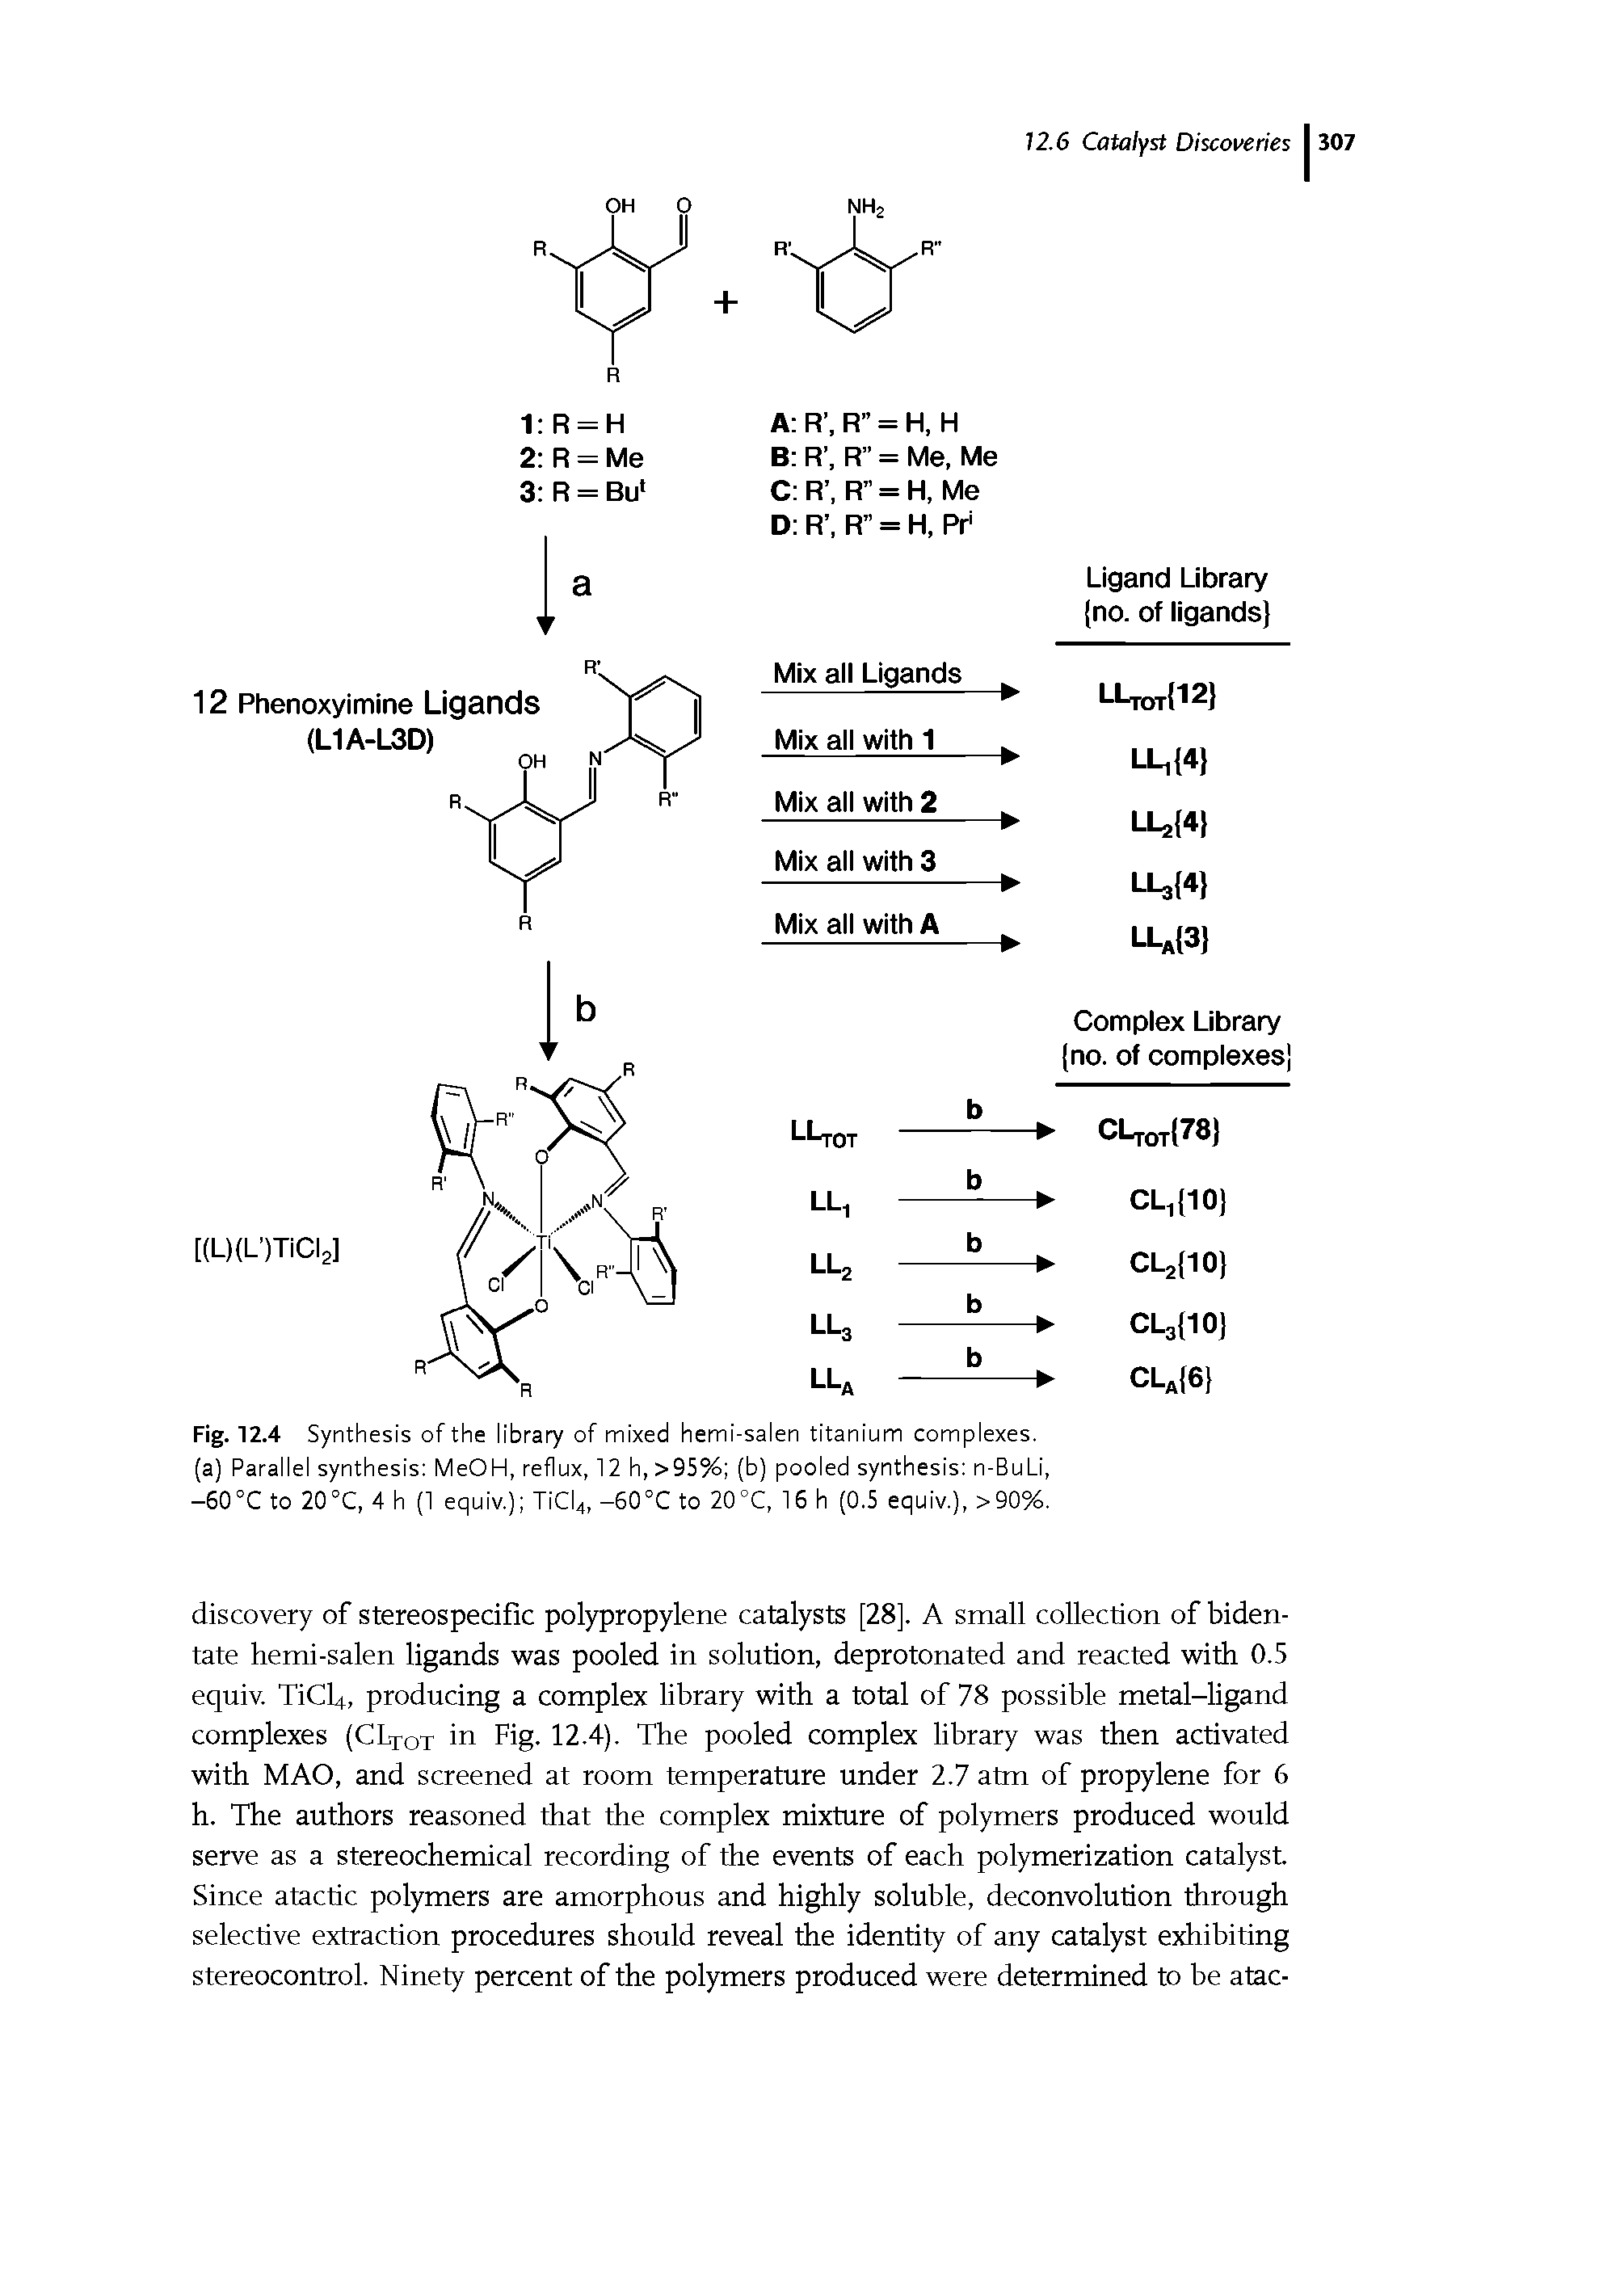 Fig. 12.4 Synthesis of the library of mixed hemi-salen titanium complexes, (a) Parallel synthesis MeOH, reflux, 12 h, >95% (b) pooled synthesis n-BuLi, -60°C to 20°C, 4 h (1 equiv.) TiCI4, -60°C to 20°C, 16 h (0.5 equiv.), >90%.